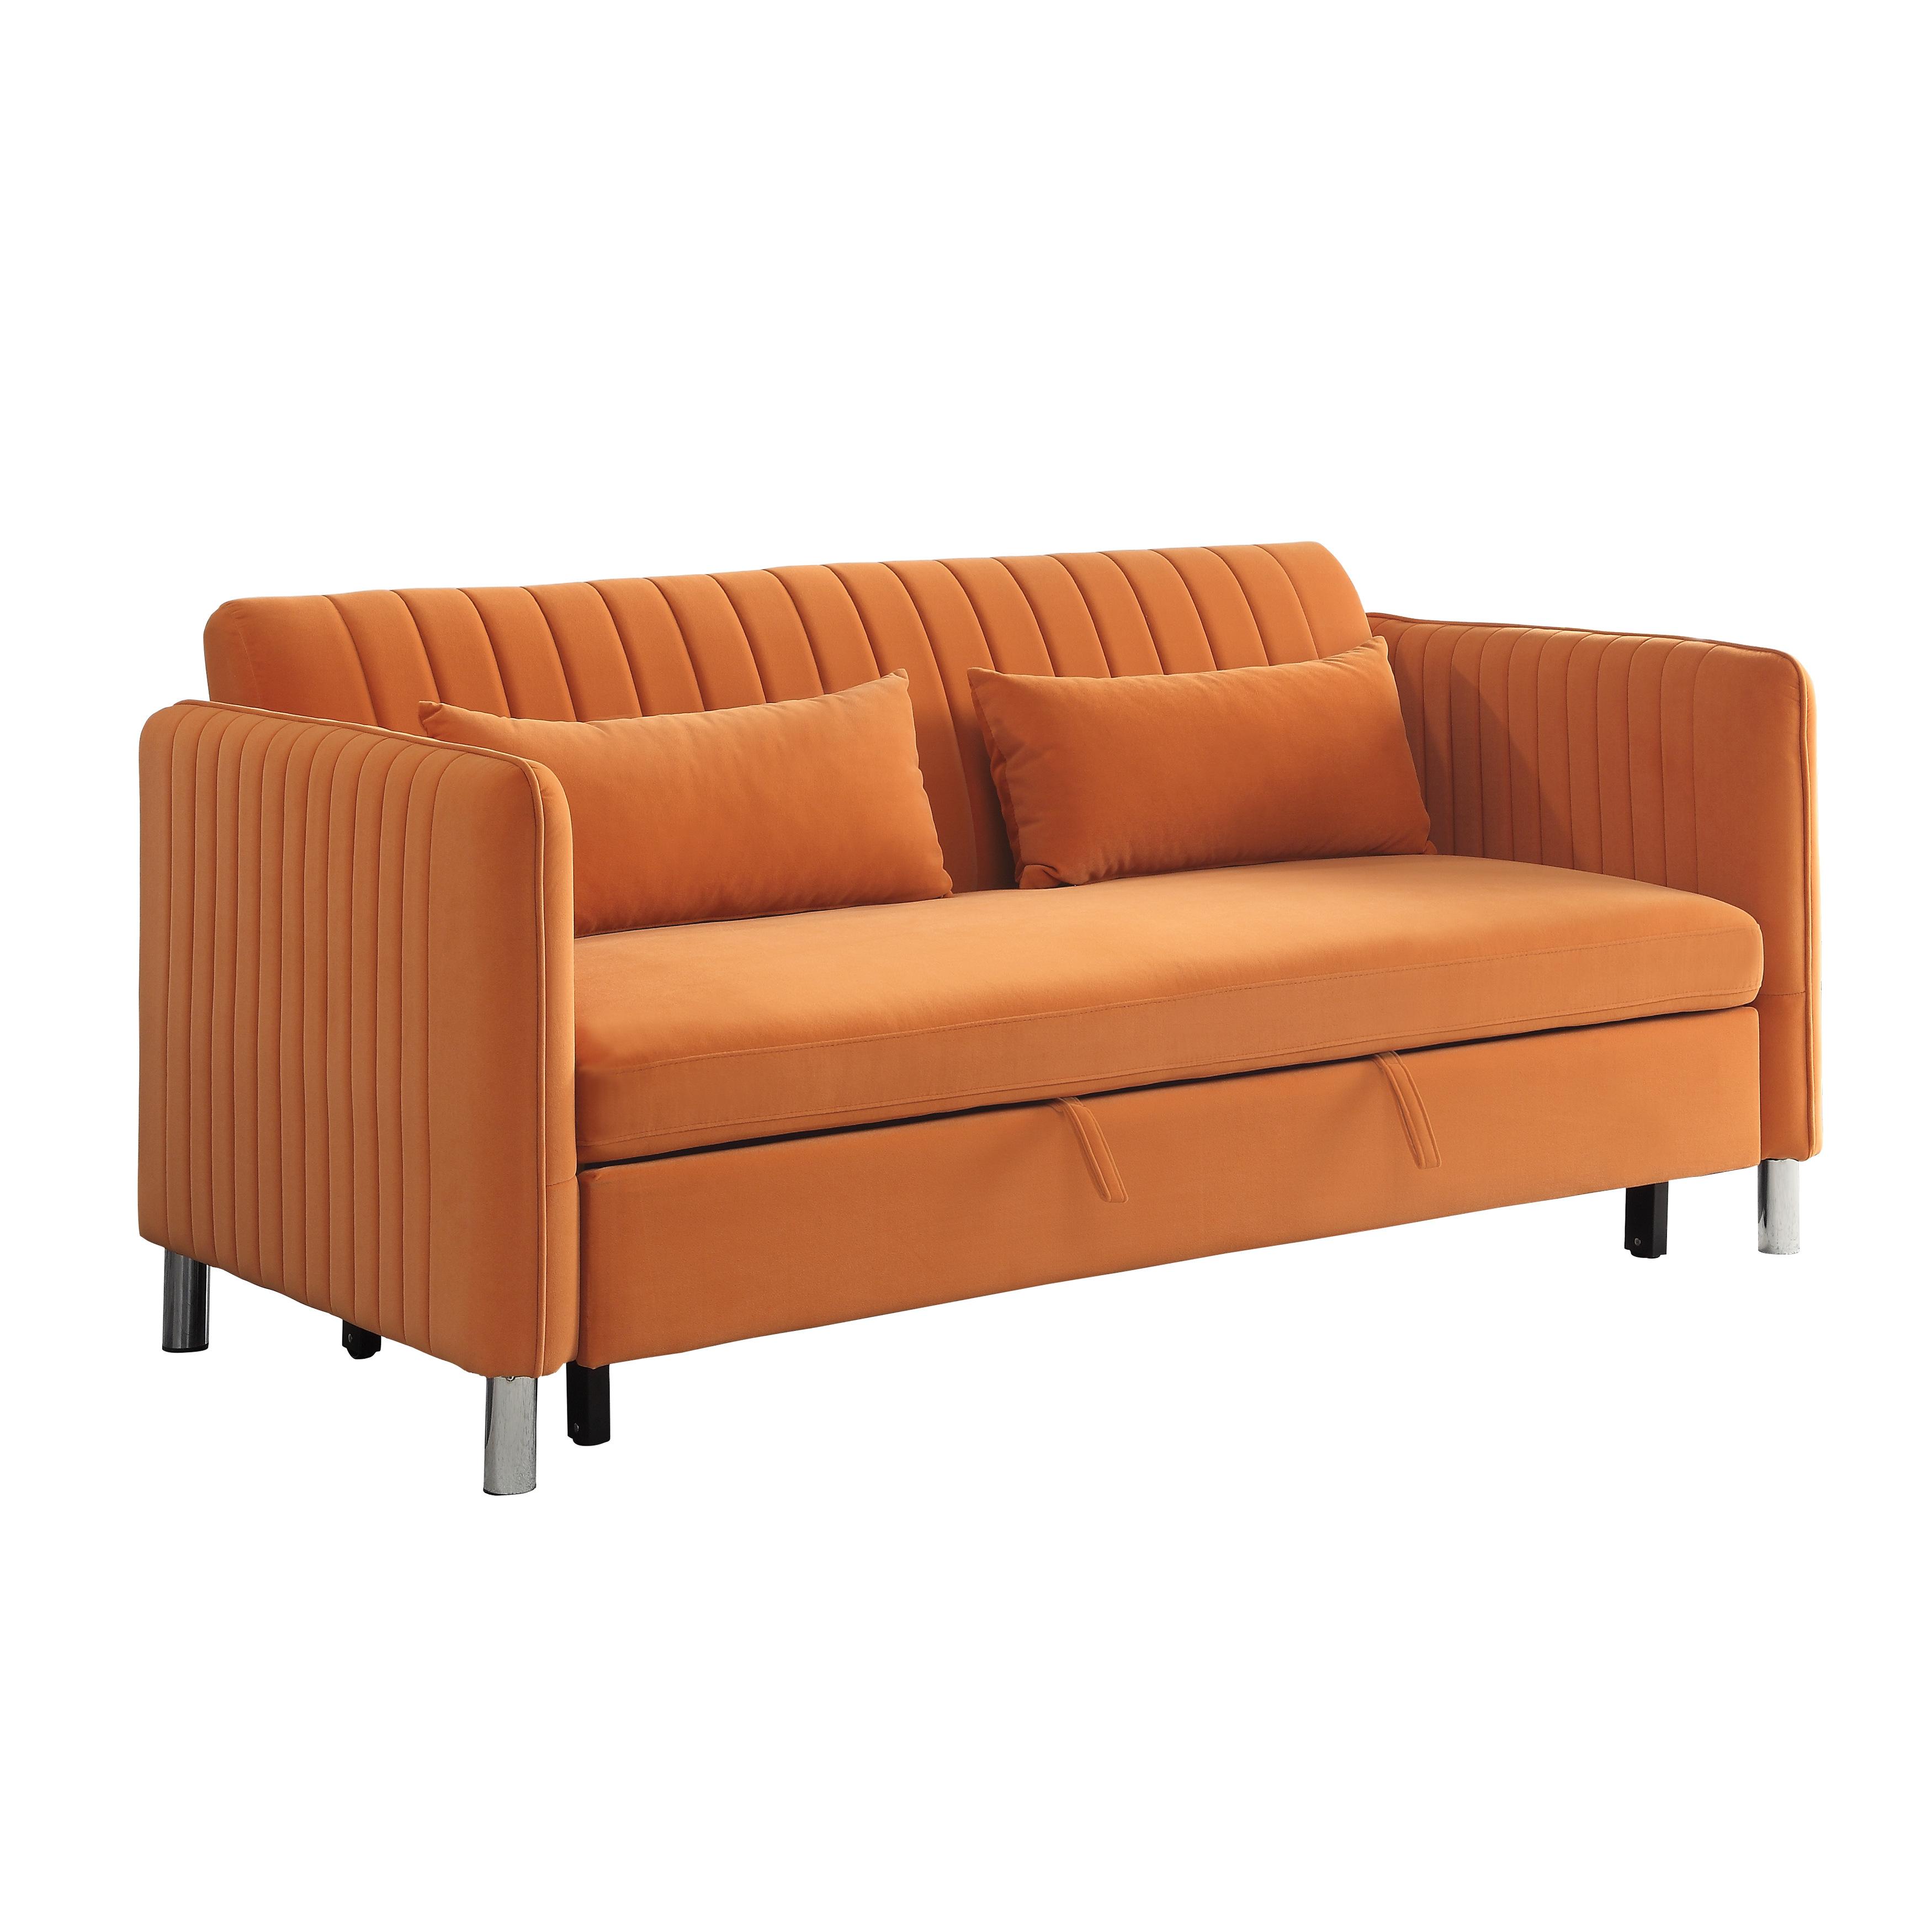 

    
Contemporary Orange Solid Wood Sofa Homelegance 9406RN-3CL Greenway
